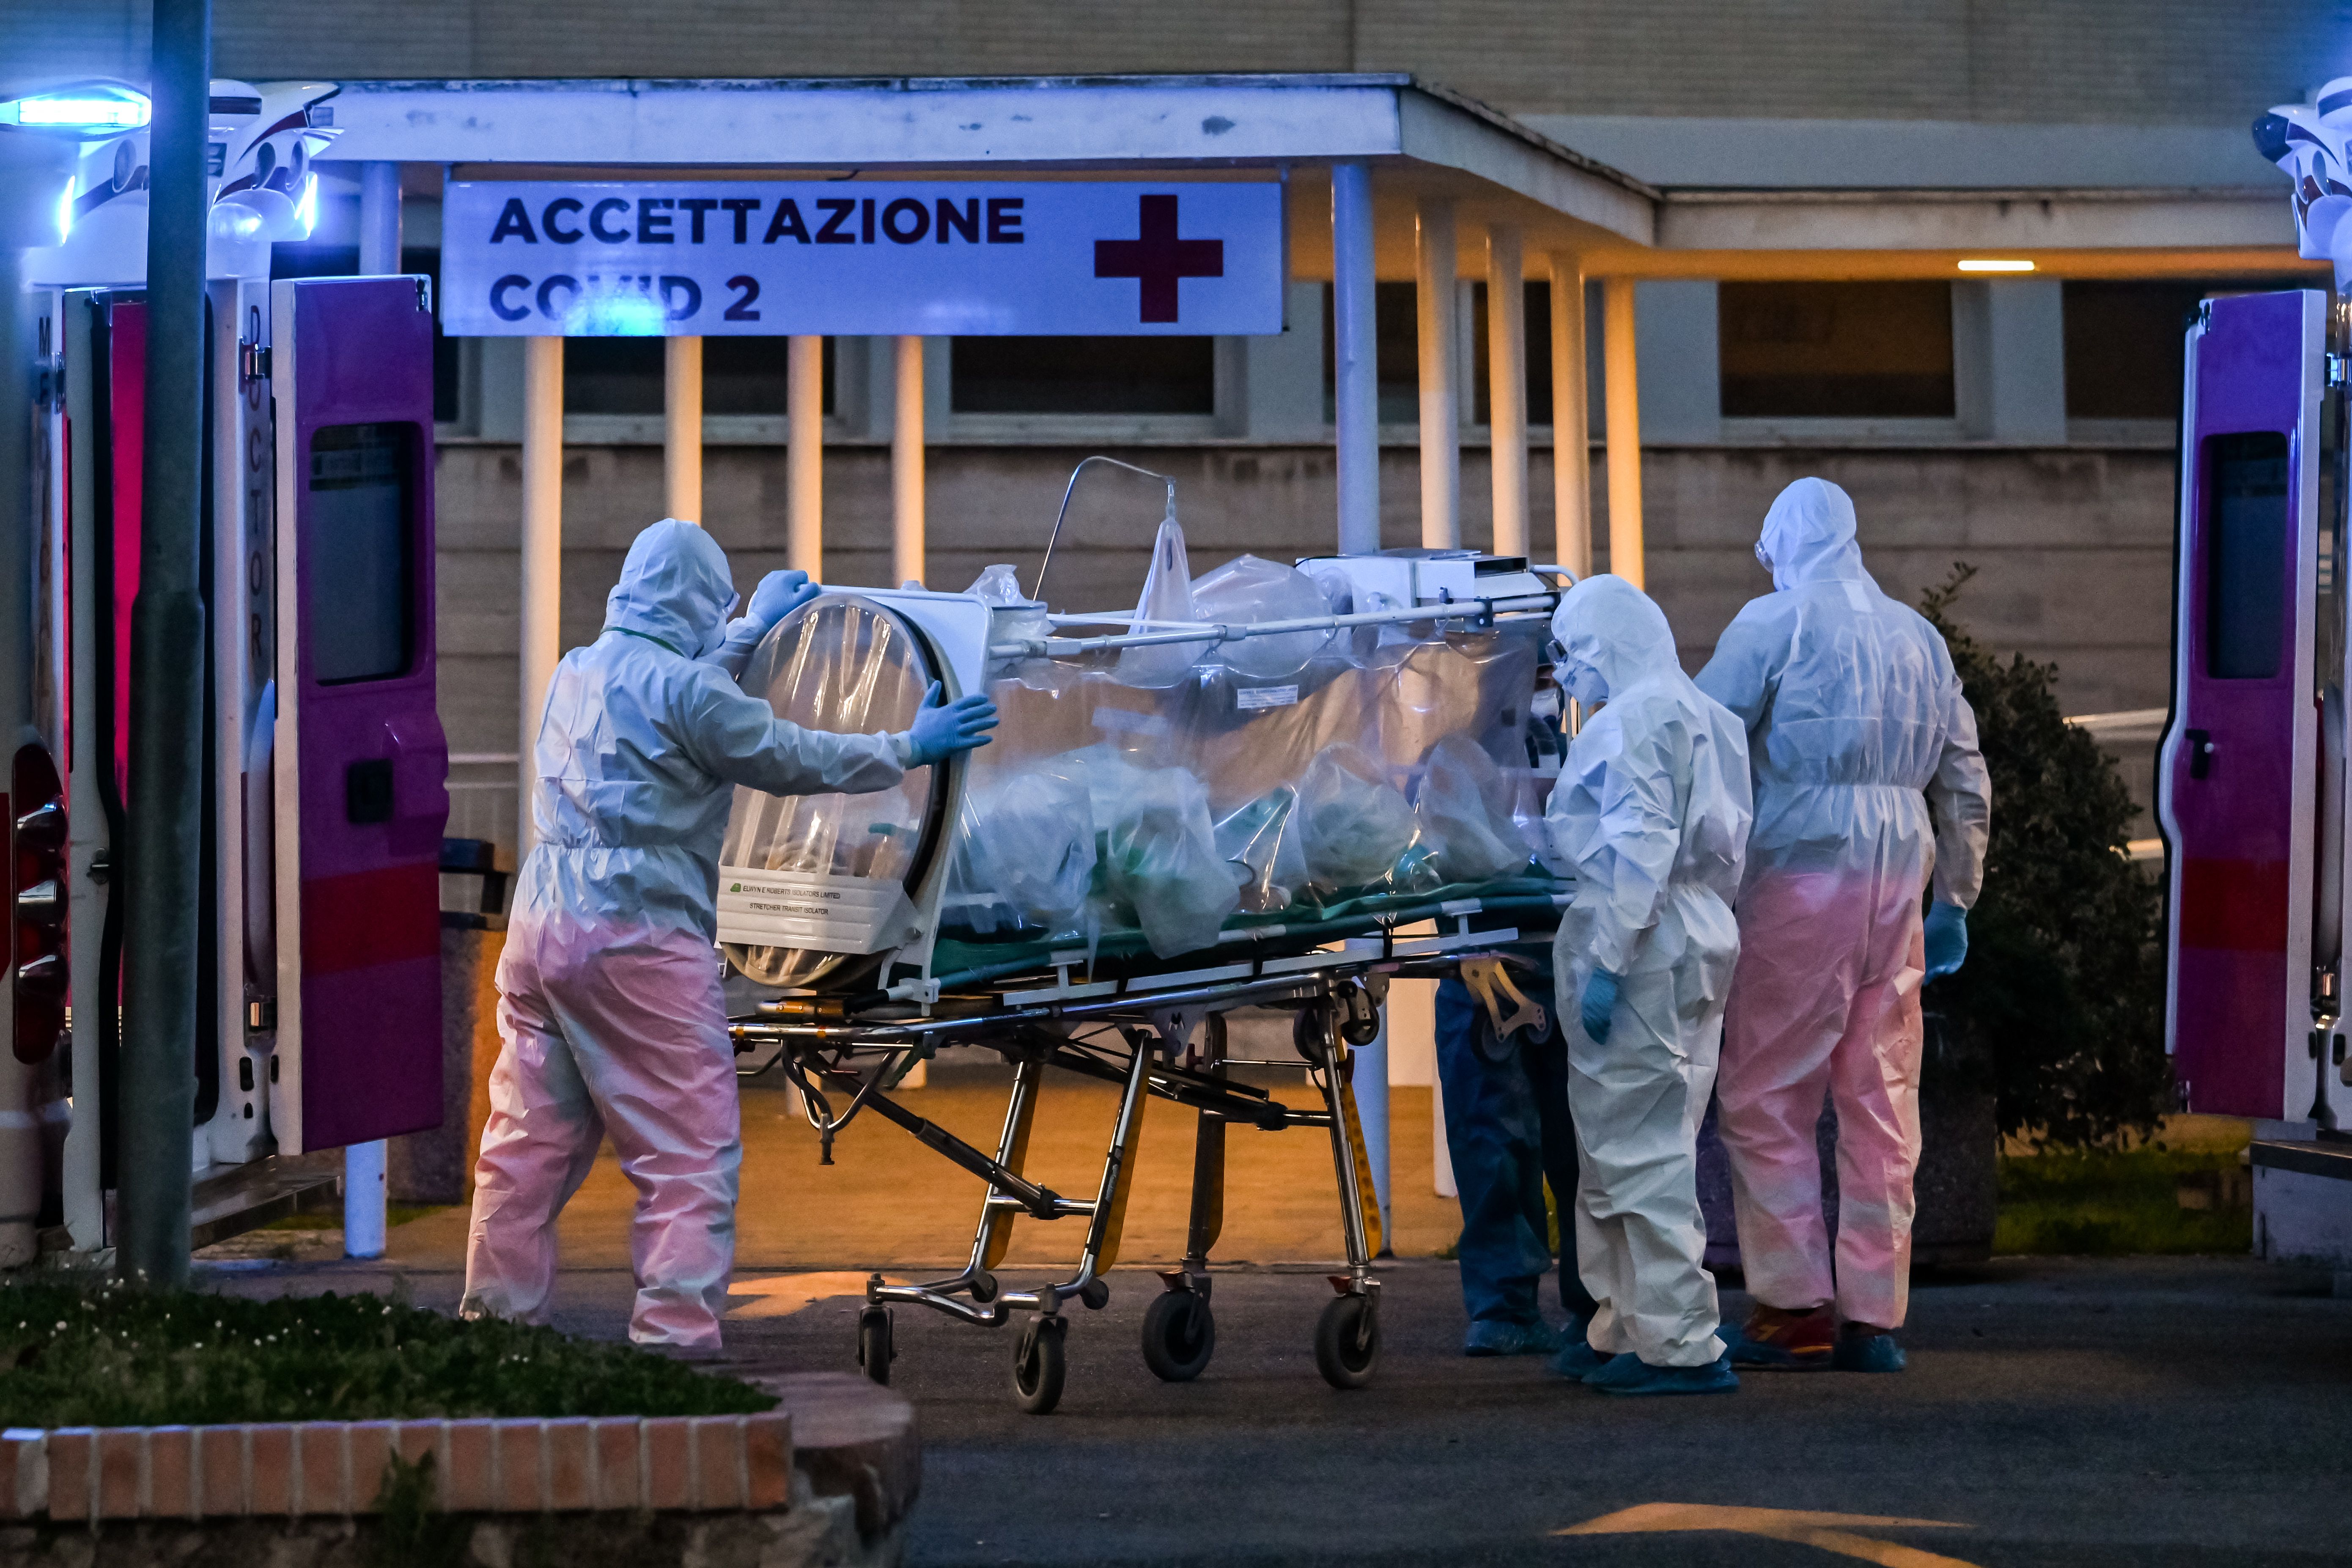 Medical workers move a coronavirus patient into a temporary facility at the Gemelli hospital in Rome, Italy on March 16.